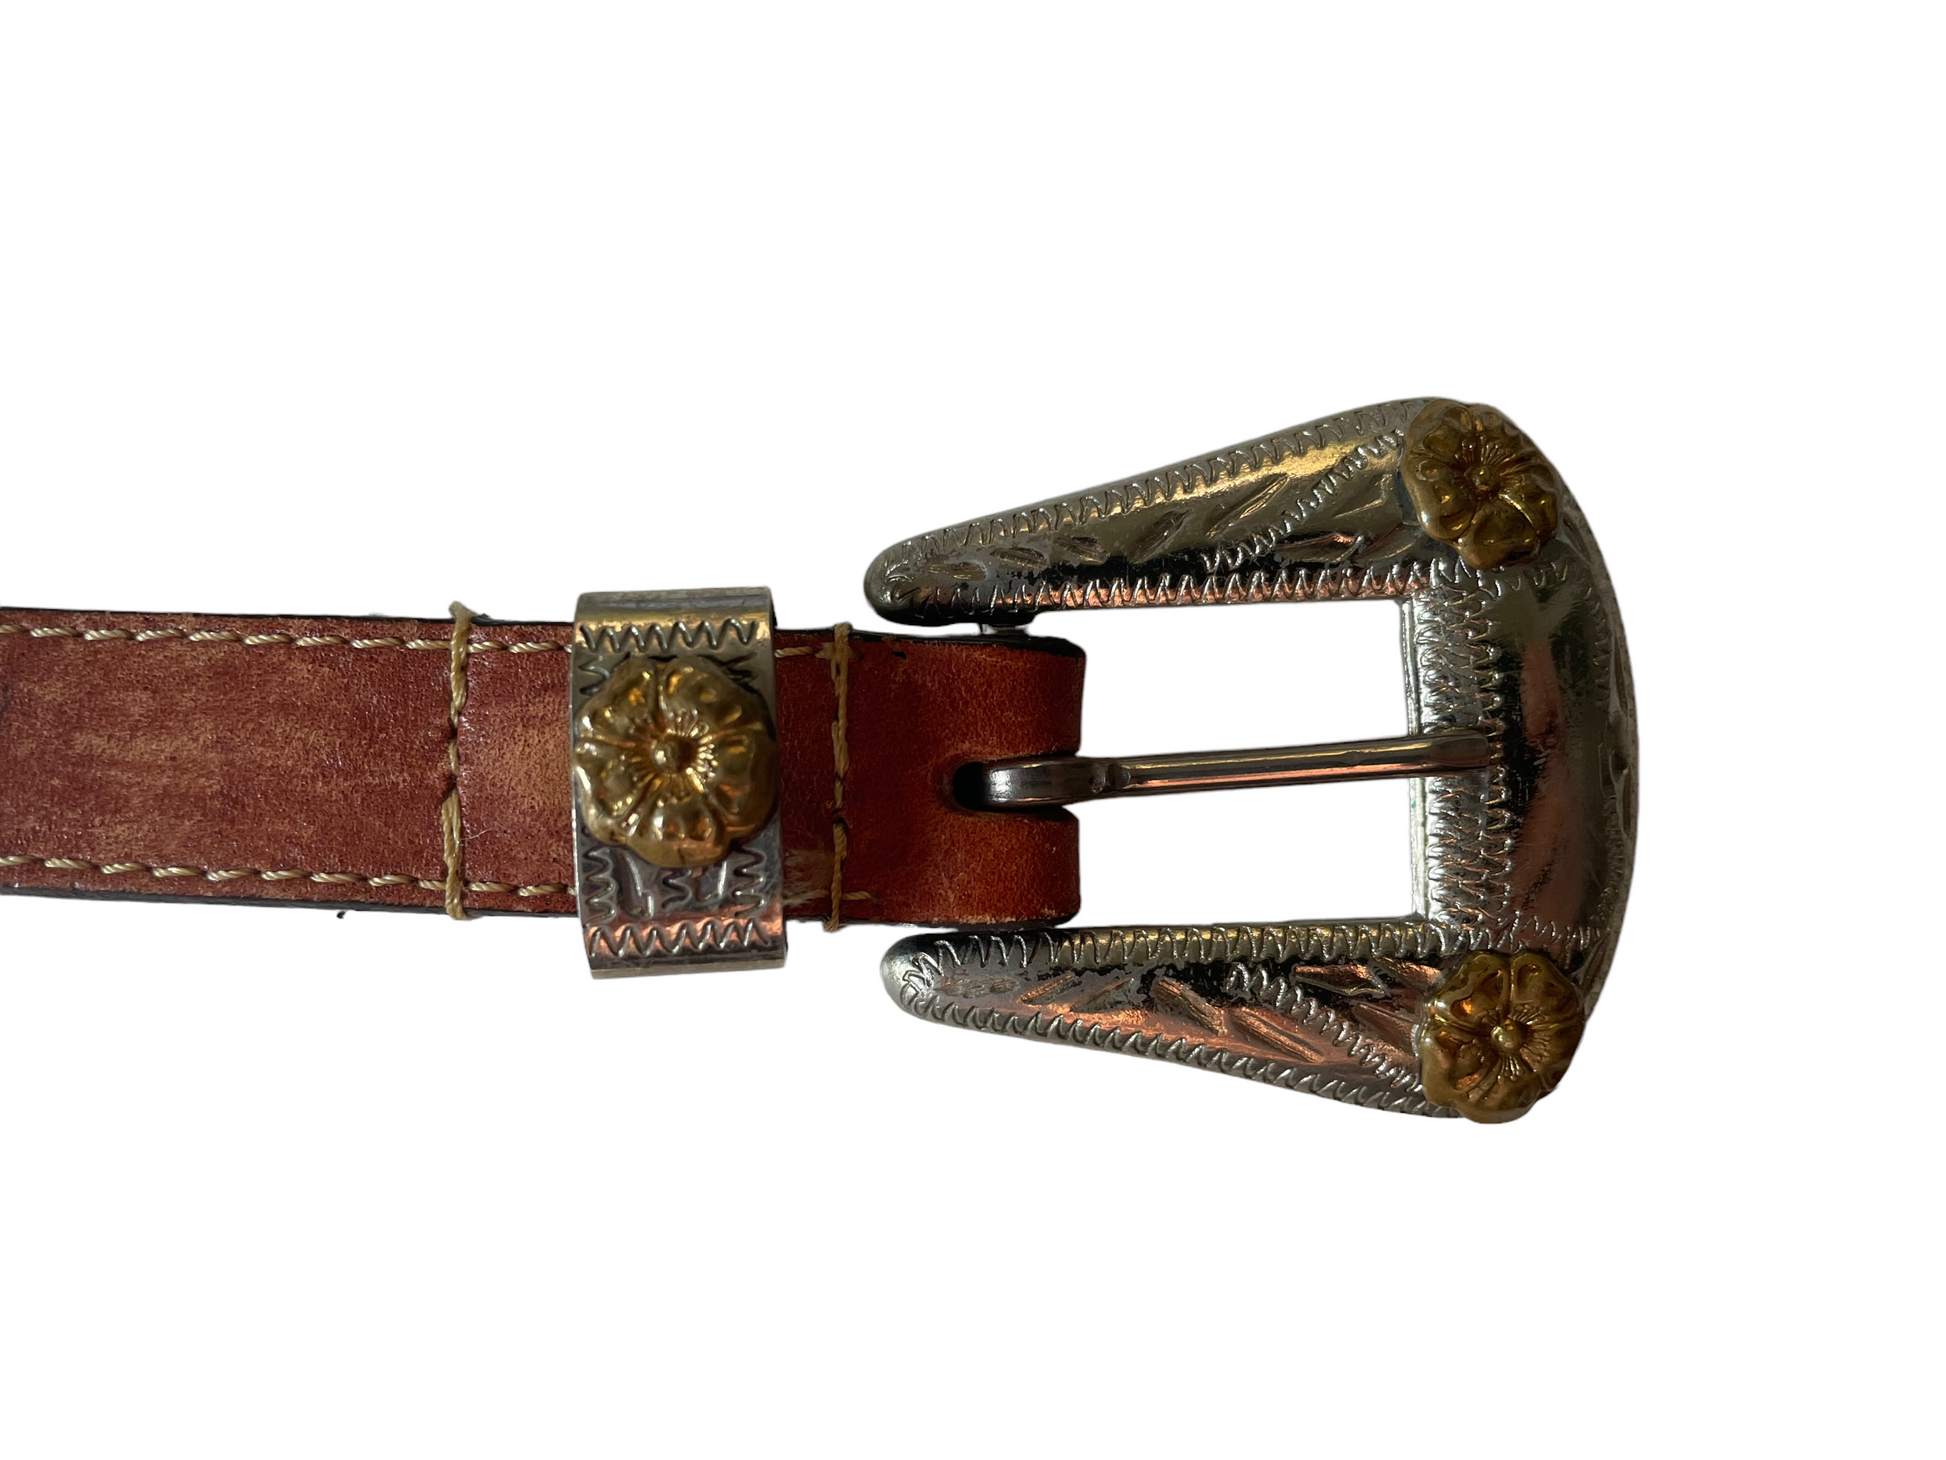 Vintage Leather Belt with Western Buckle Front view of buckle and keeper.